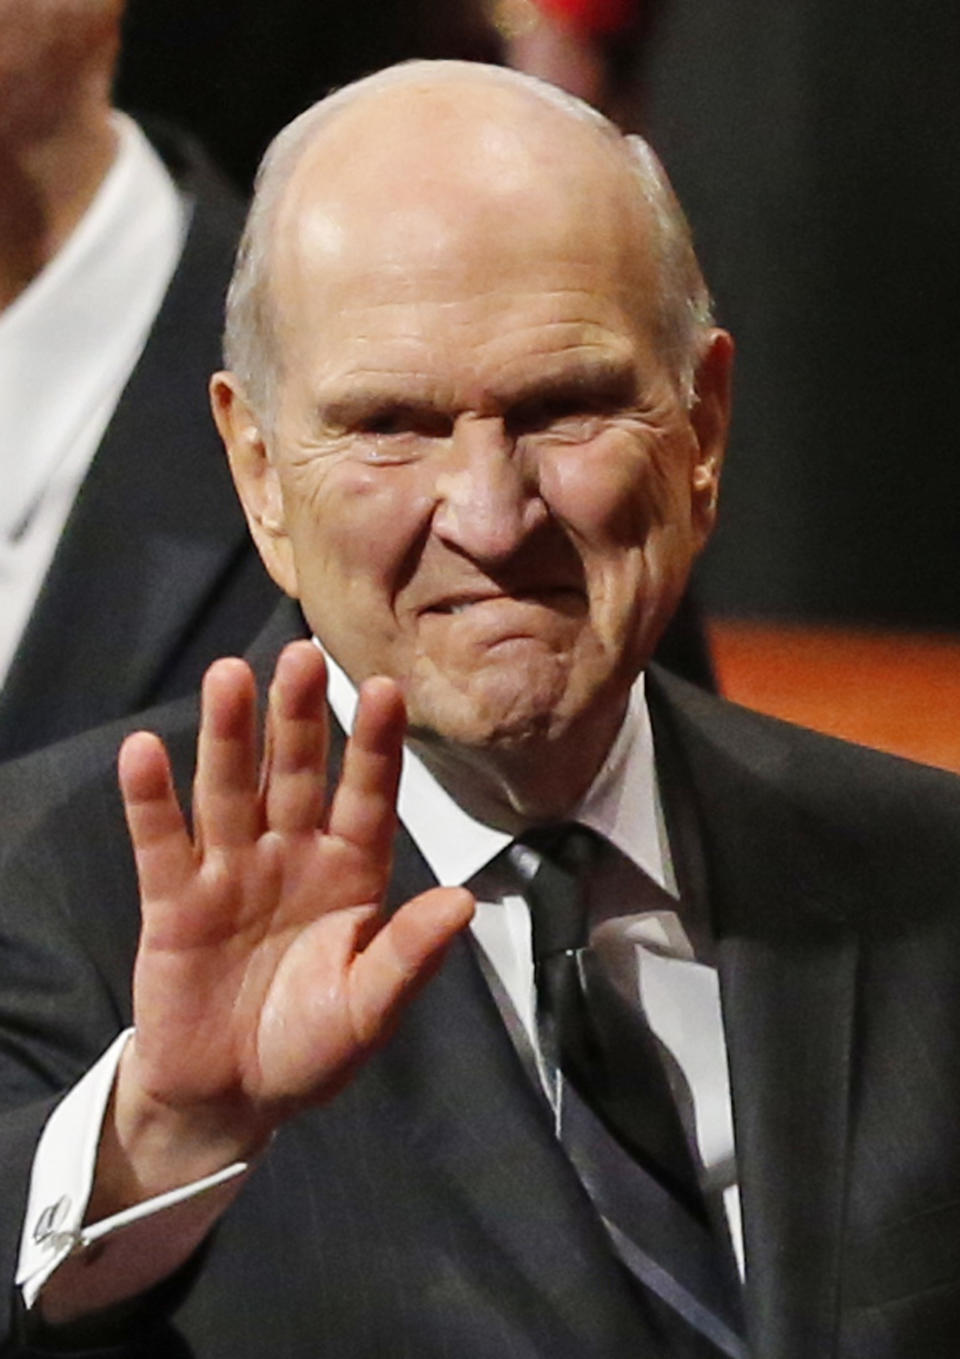 President Russell M. Nelson waves as he leaves the morning session of a twice-annual conference of The Church of Jesus Christ of Latter-day Saints Saturday, Oct. 6, 2018, in Salt Lake City. (AP Photo/Rick Bowmer)